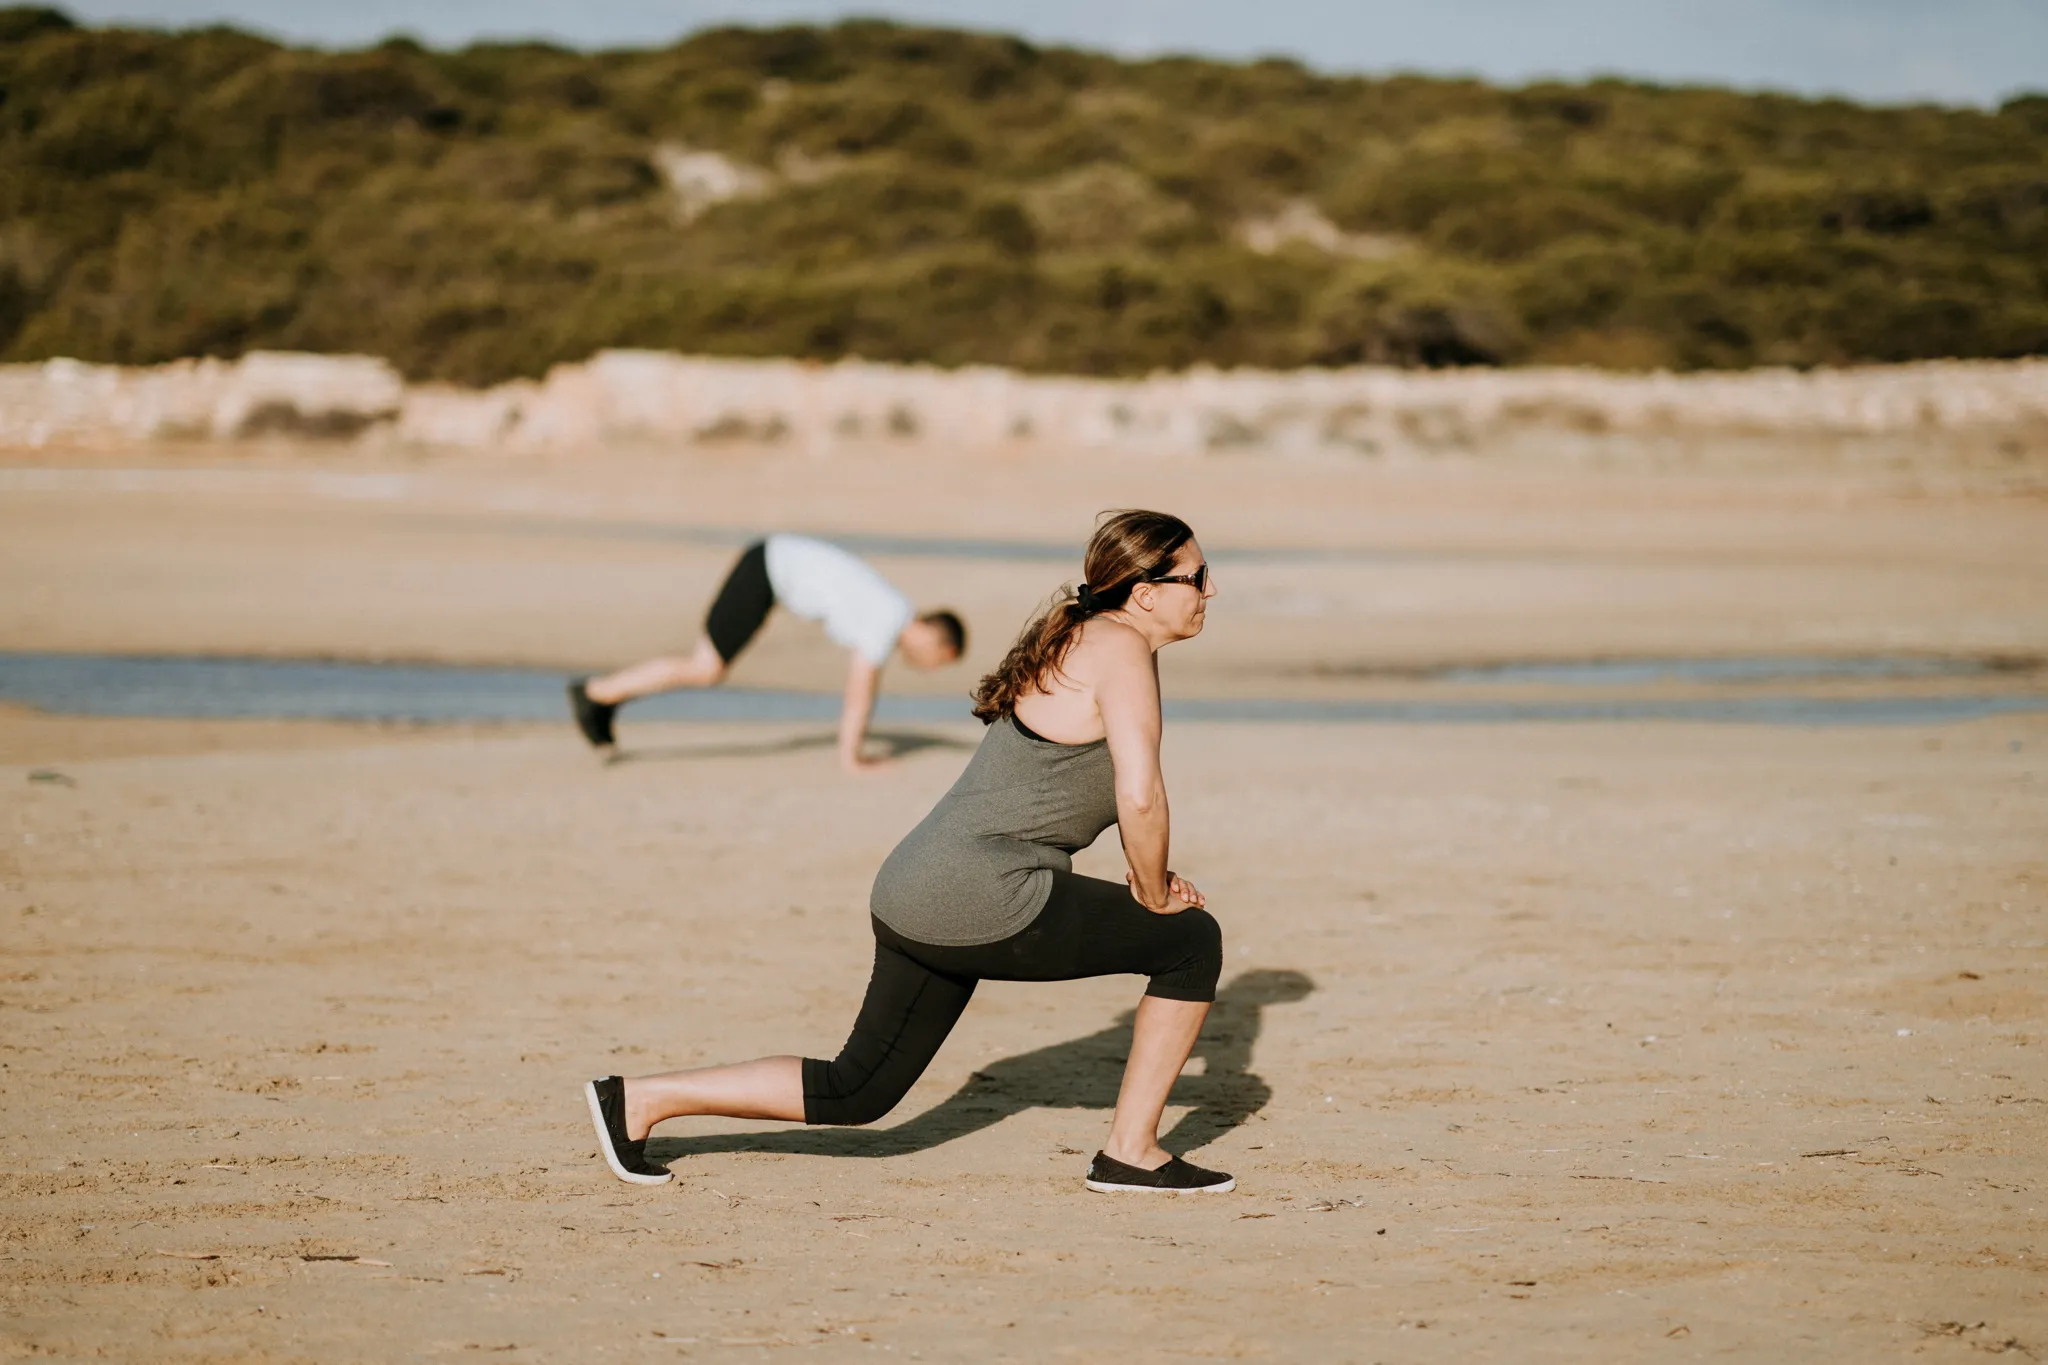 How To Do Lateral Lunge: The Beginner's Guide